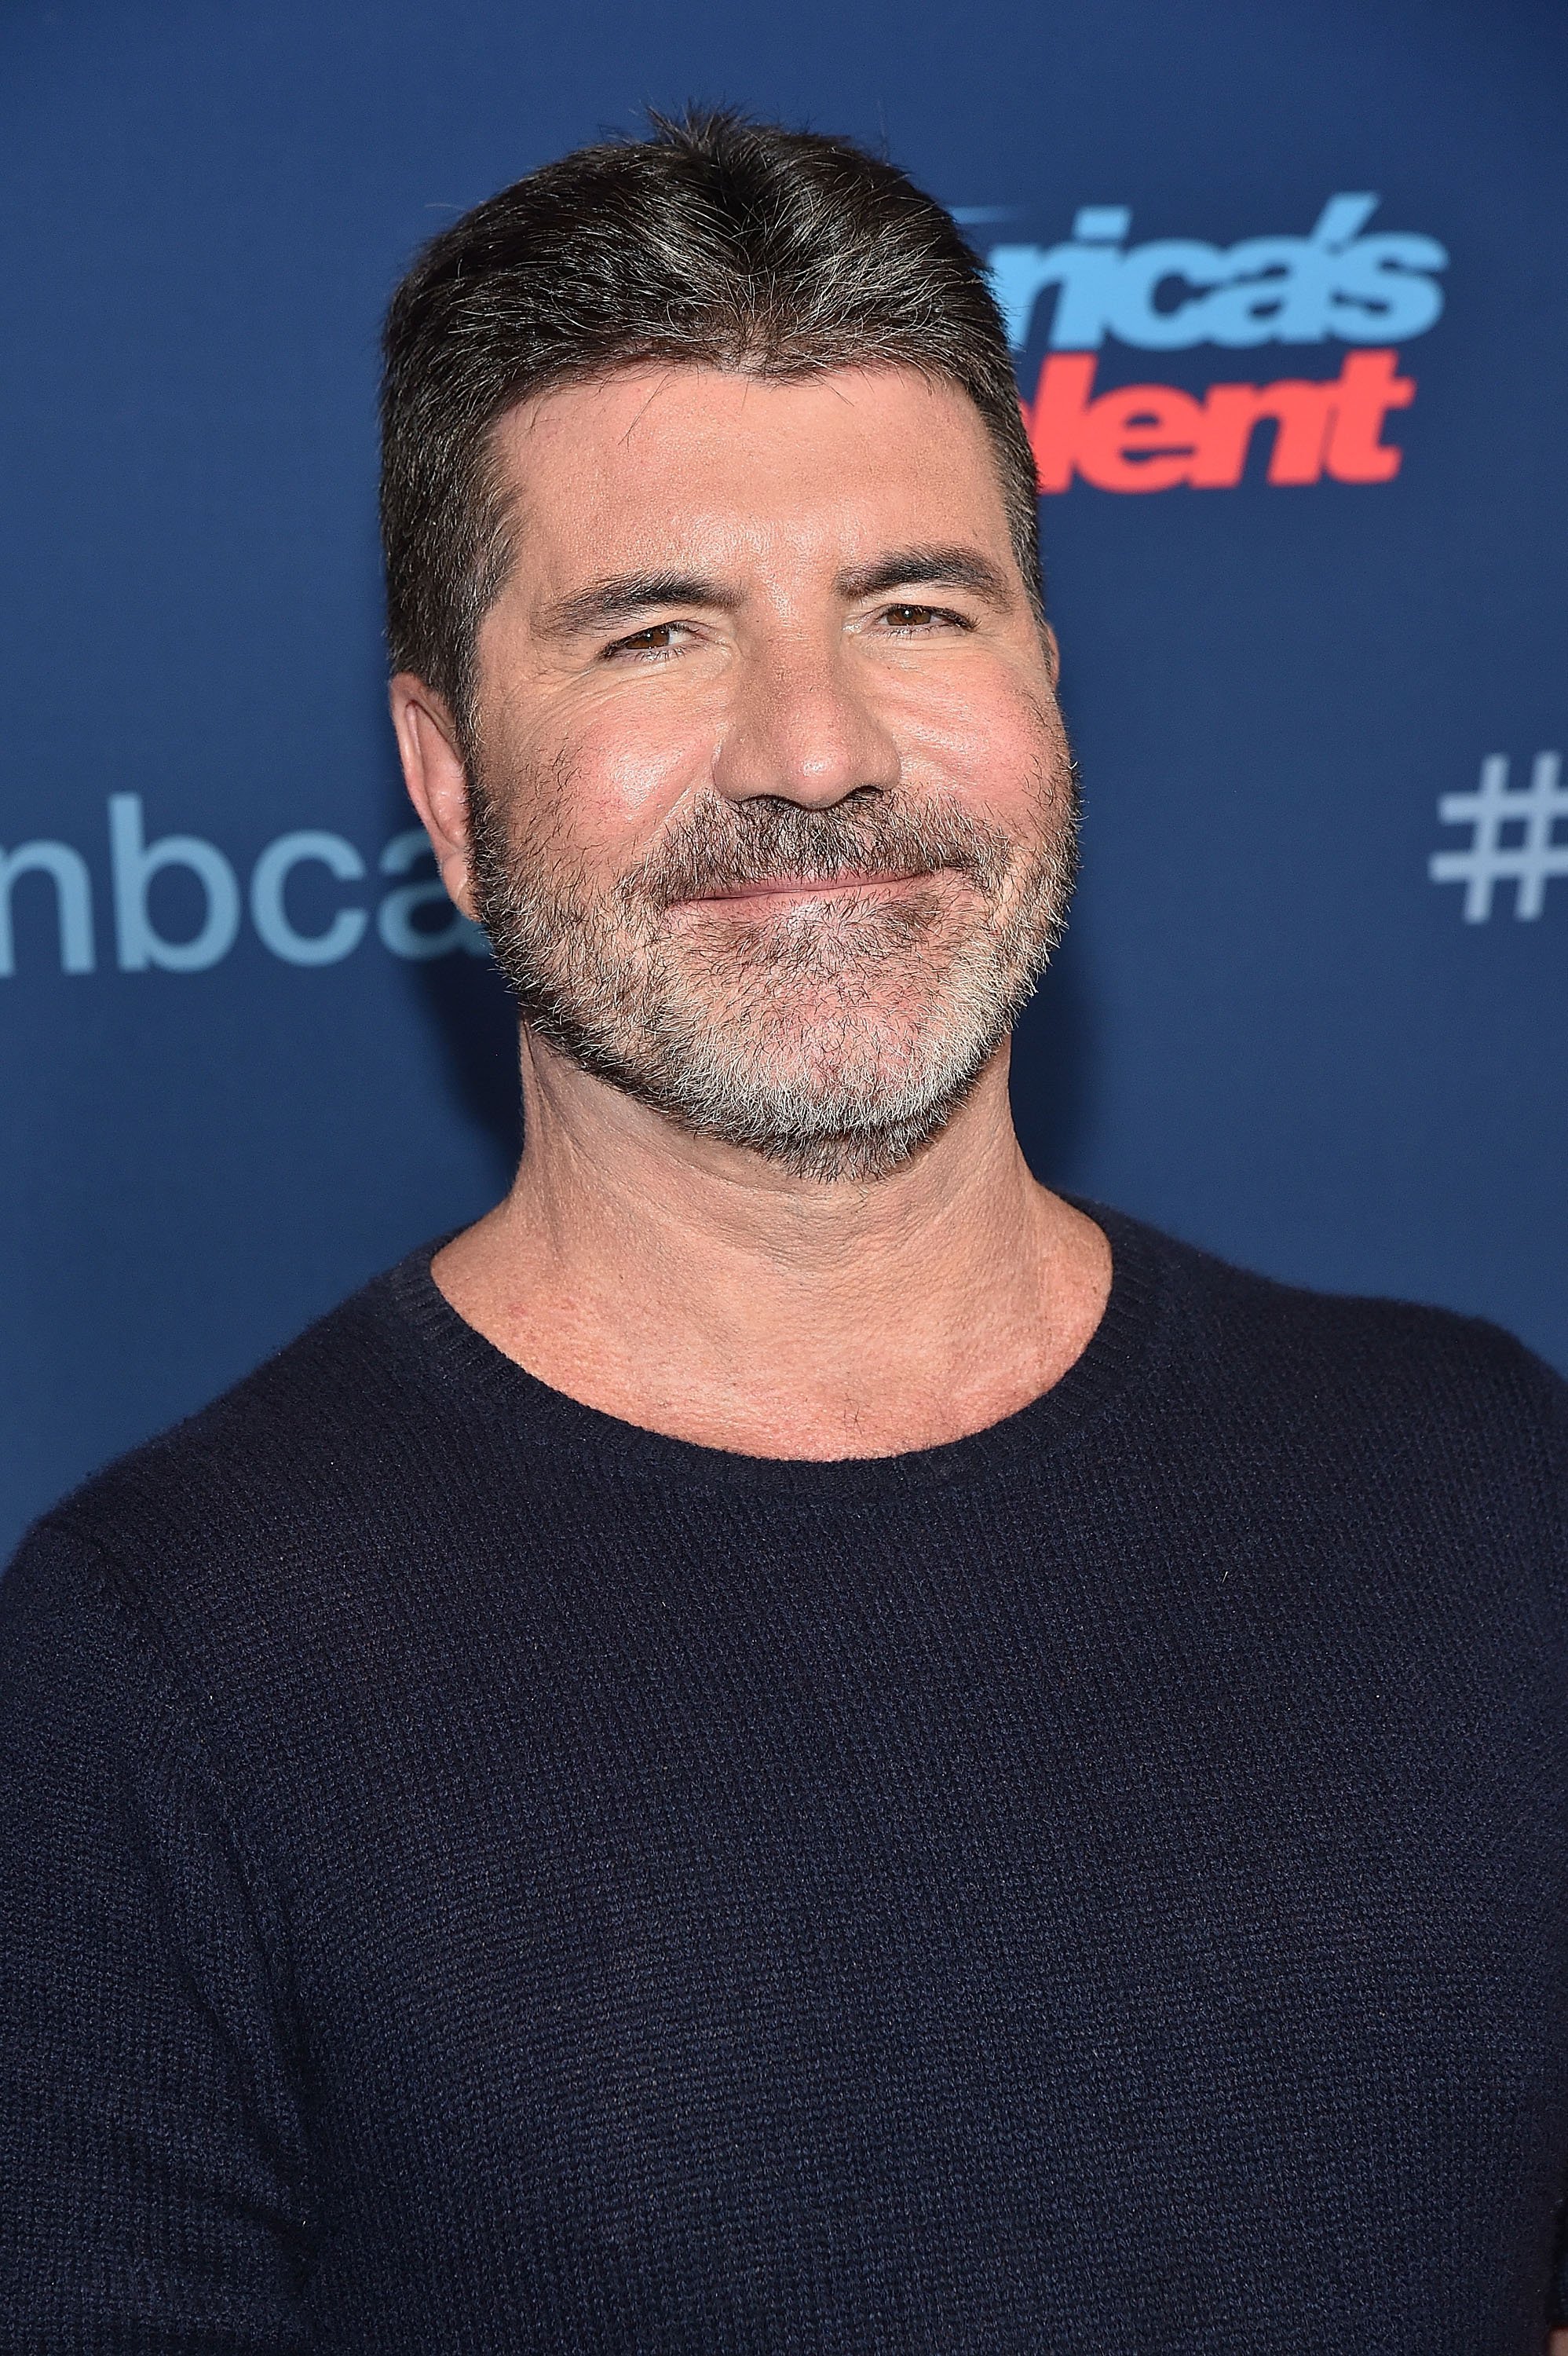 Source: Getty Images / Simon Cowell attends the "America's Got Talent" Season 11 Live Show at Dolby Theatre on August 23, 2016 in Hollywood, California